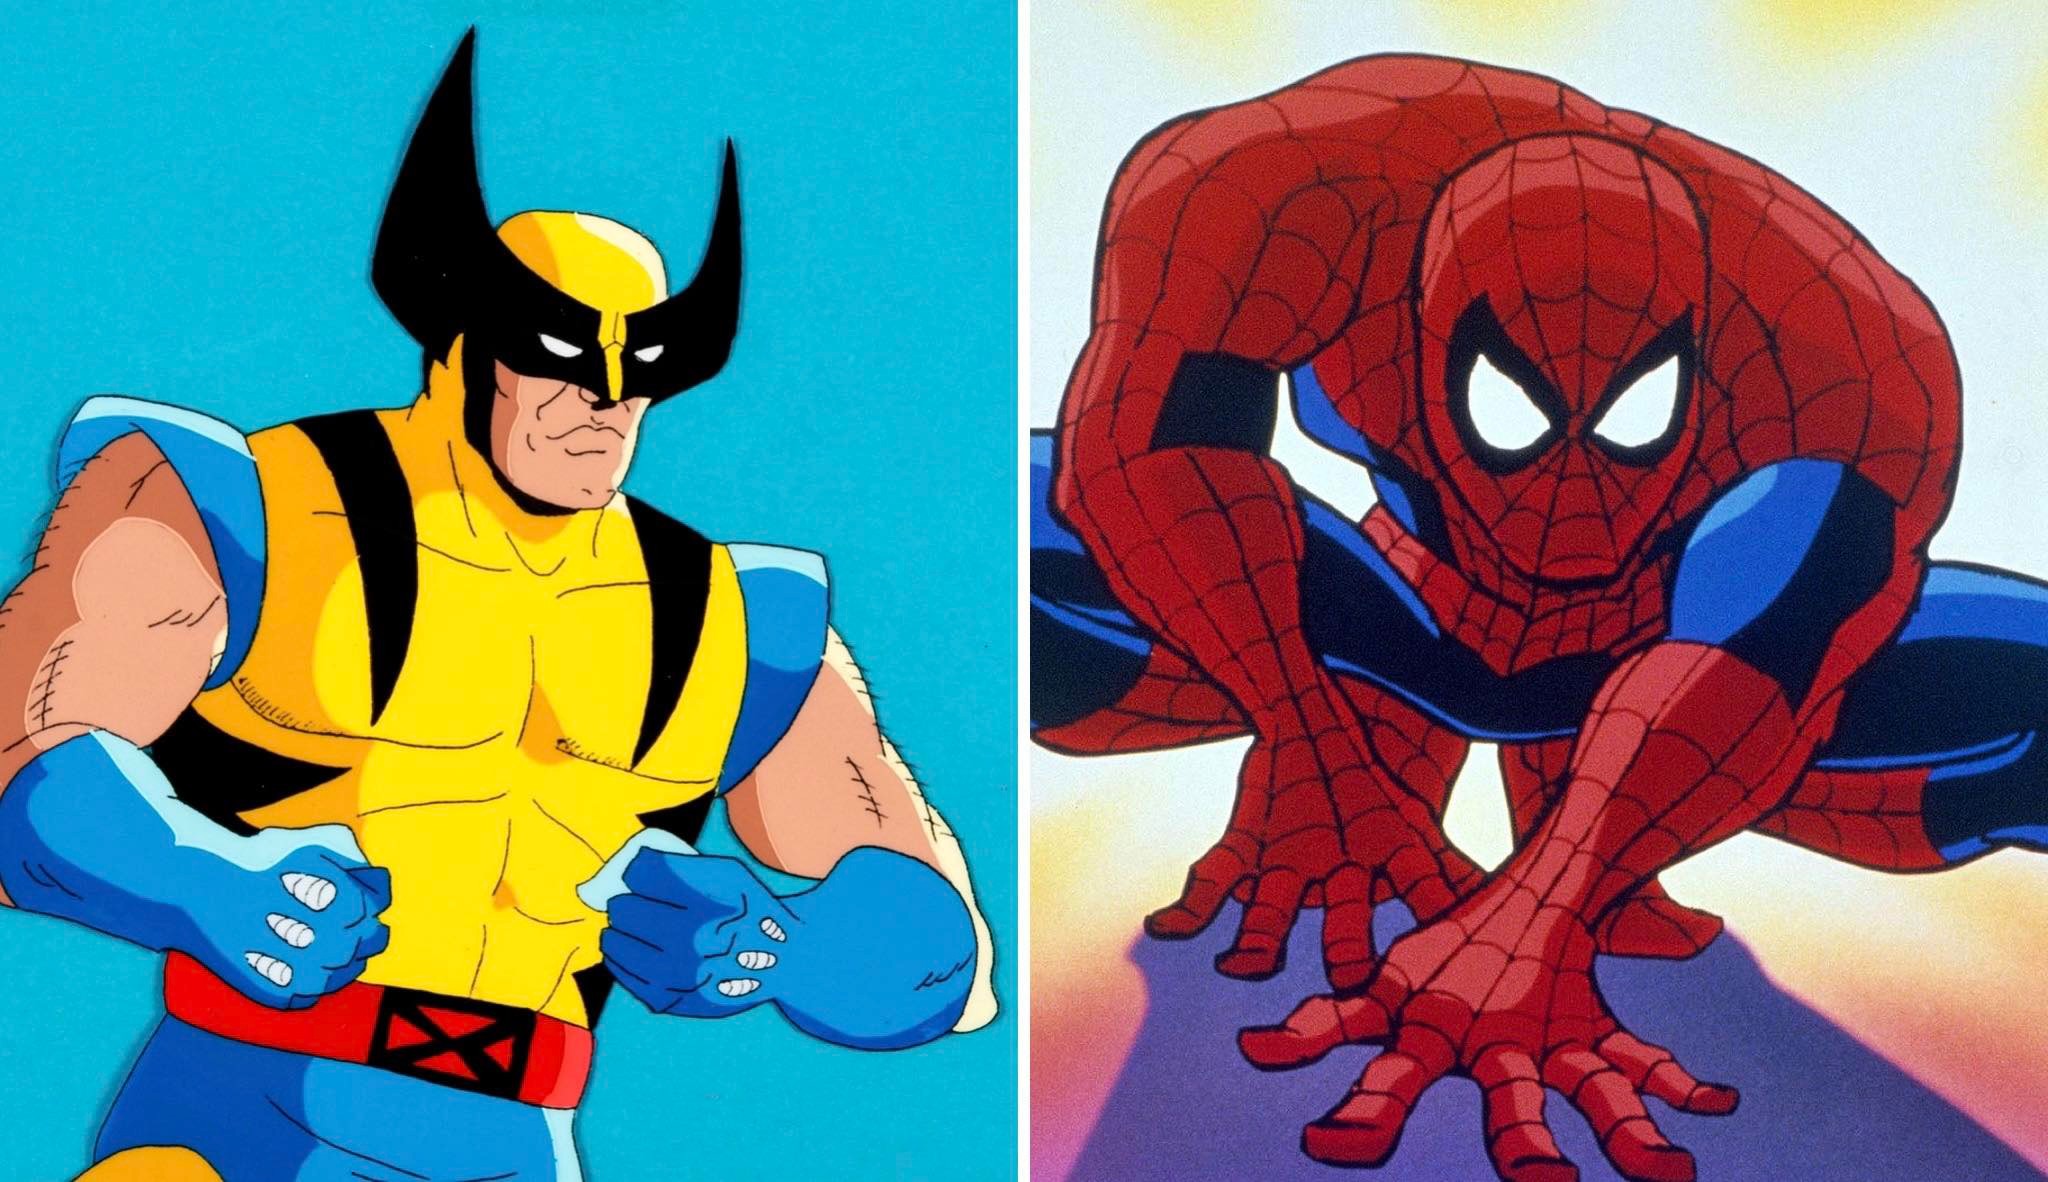 New X-Men and Spider-Man animated series are coming to Disney Plus